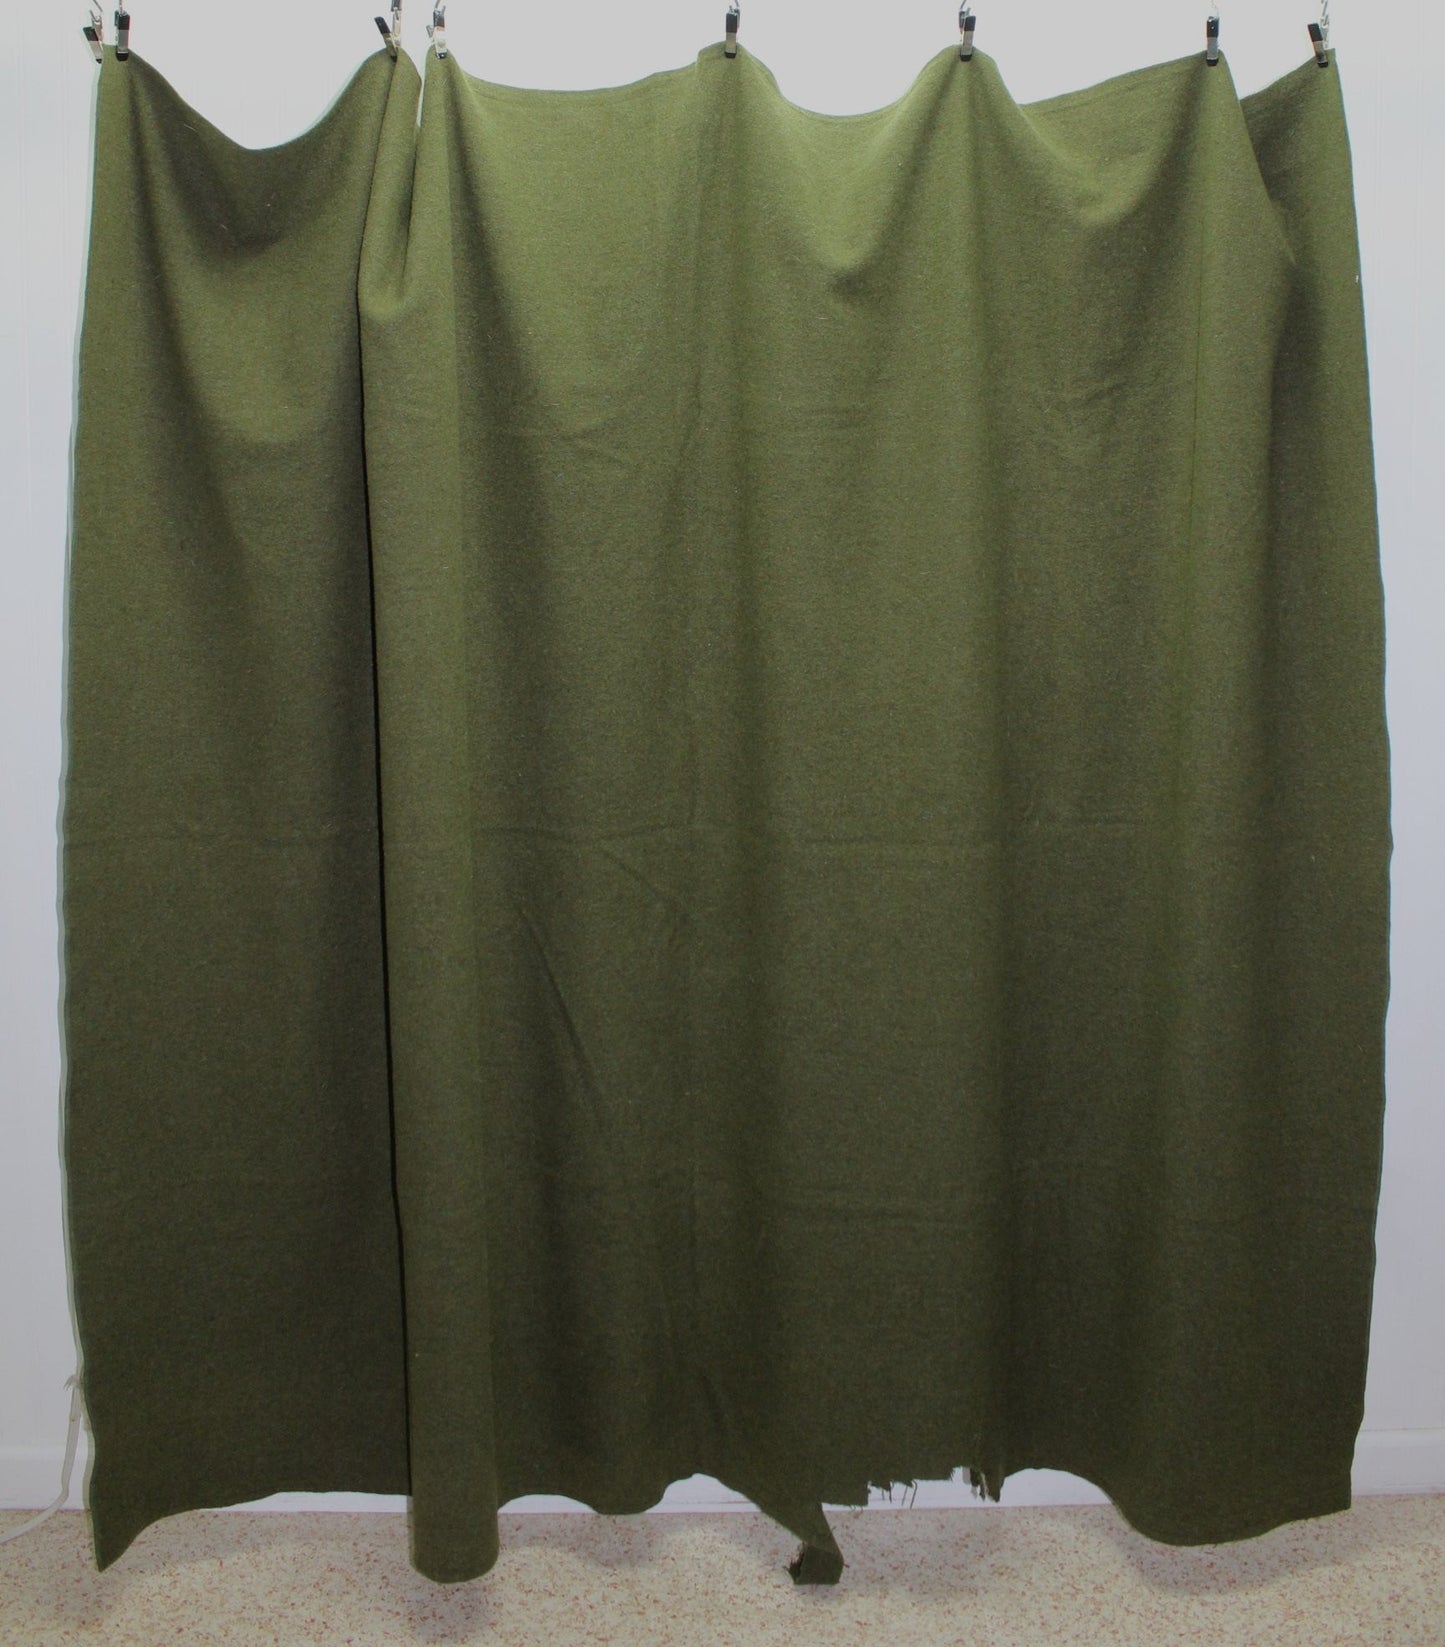 Vintage Military Style Camp Blanket Army Olive Green special price